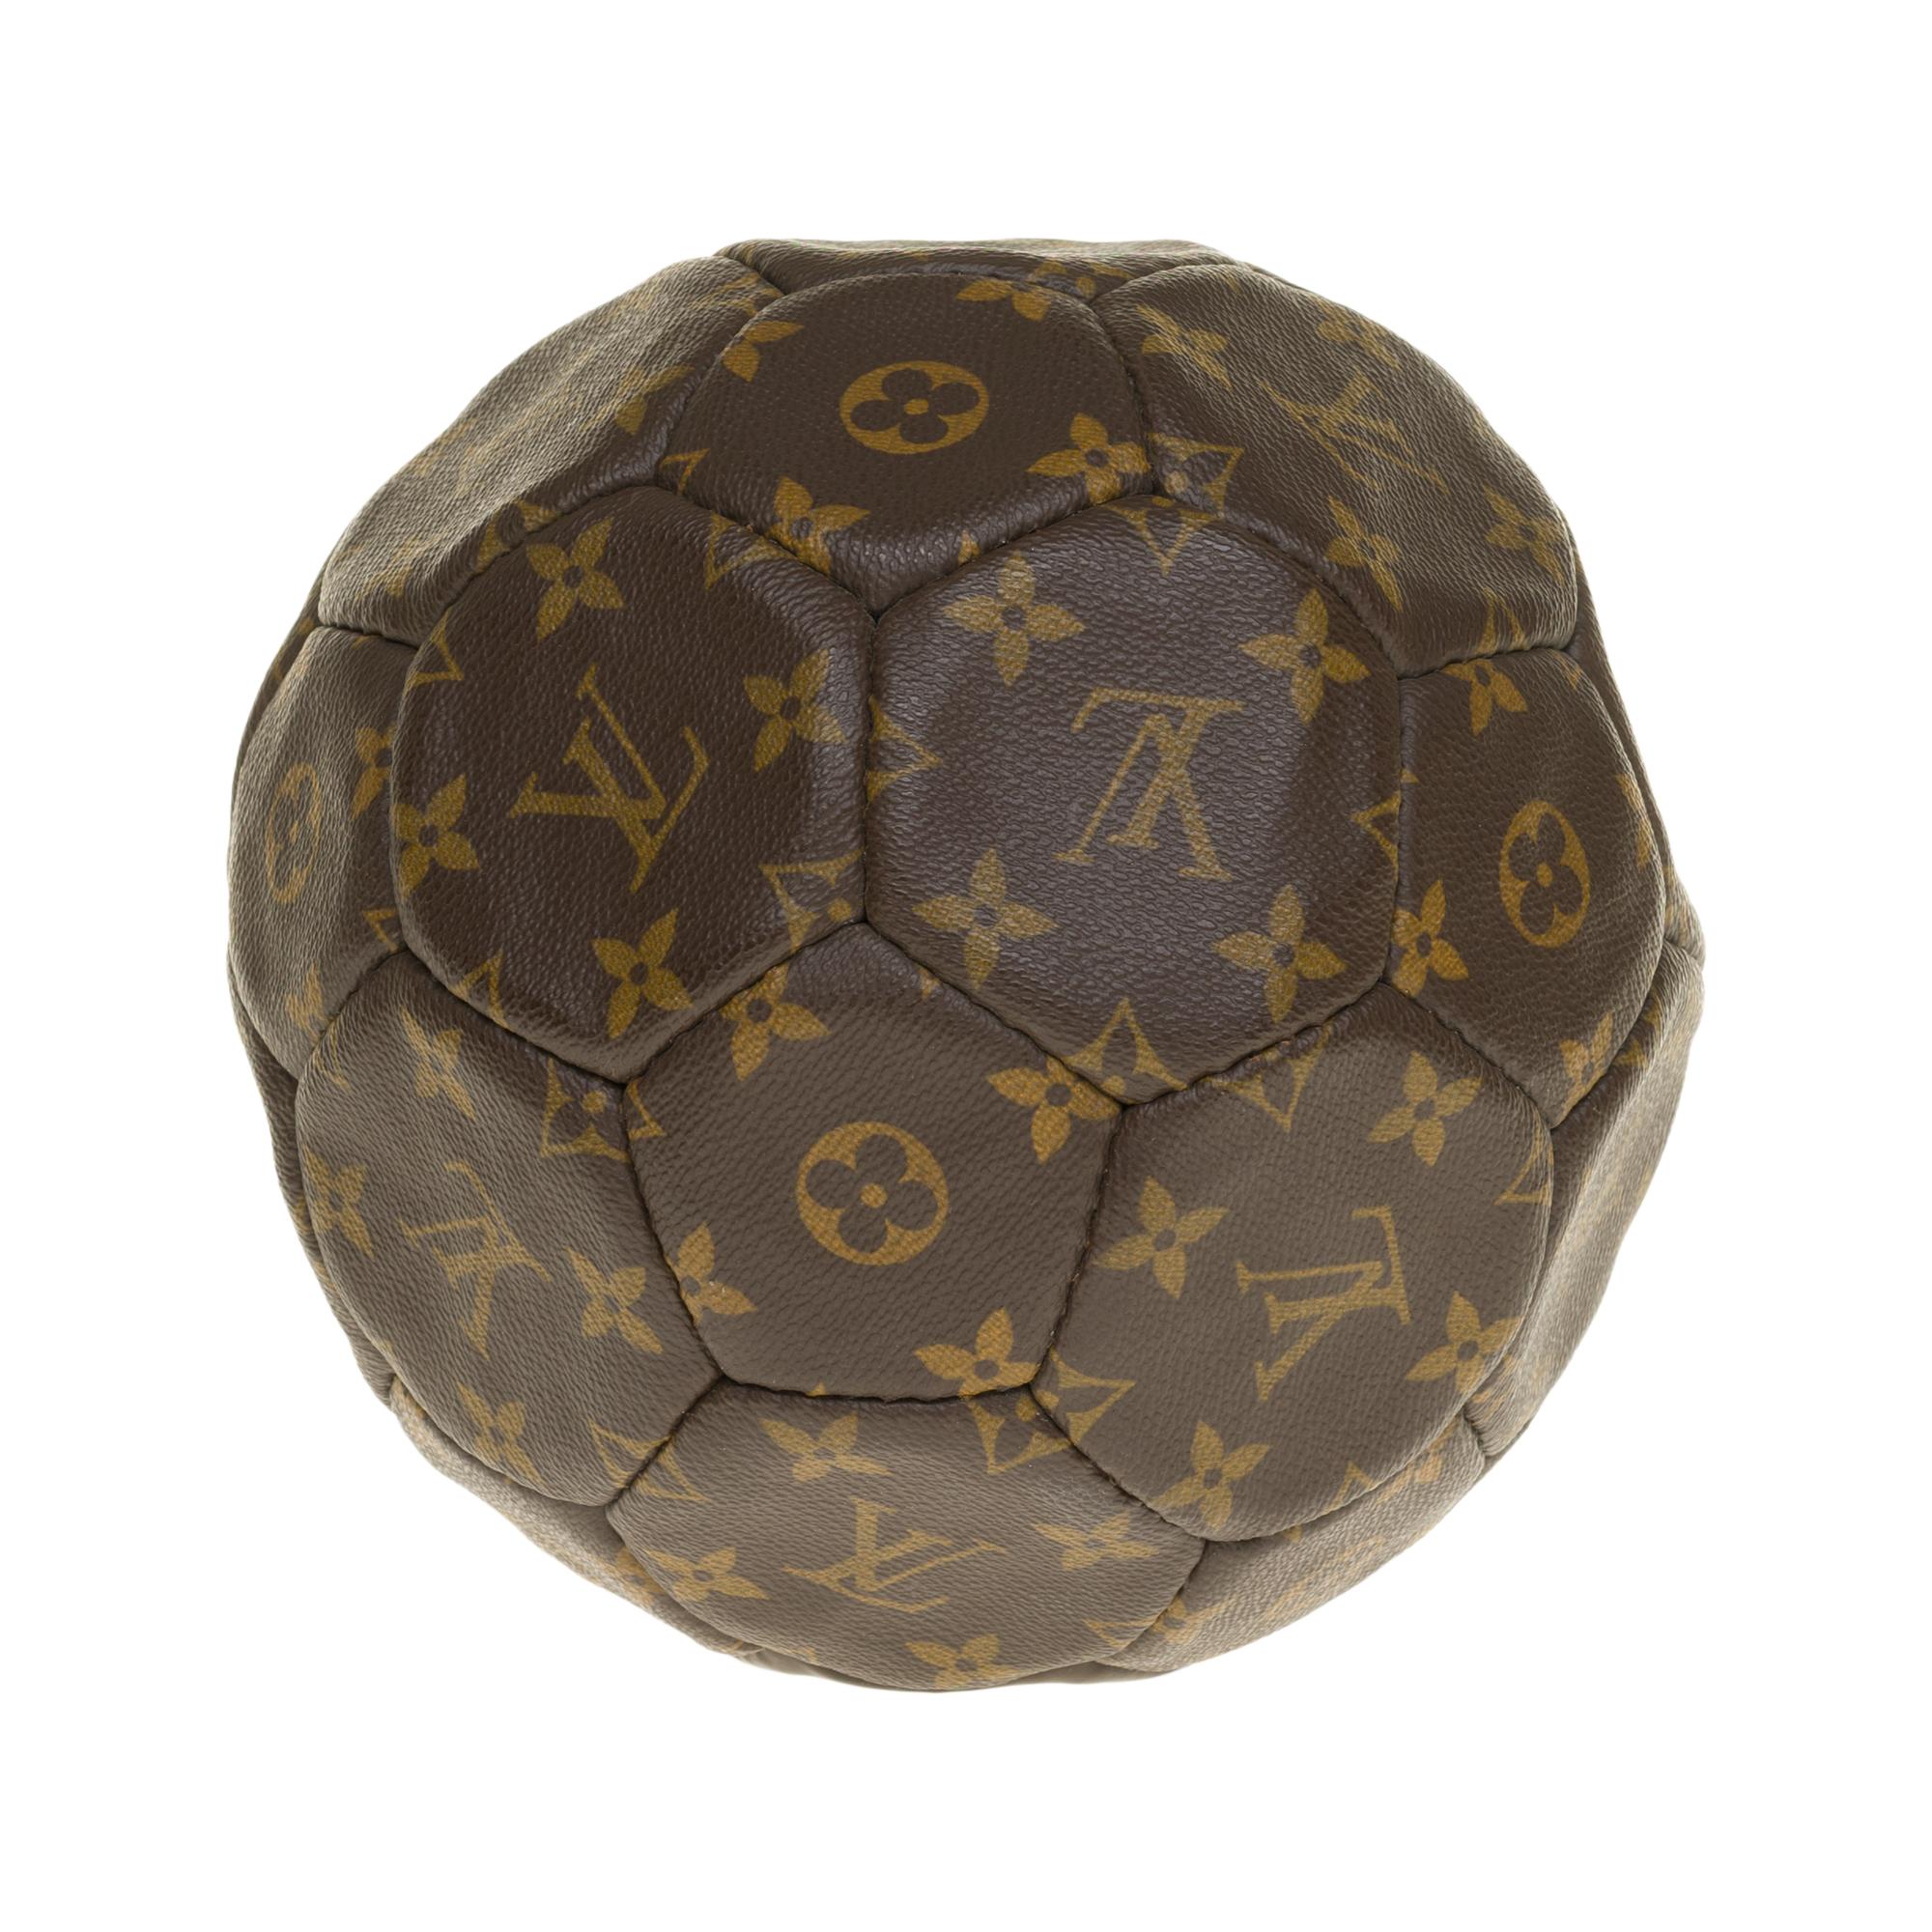 Collectible Louis Vuitton ball World Cup 98 in brown canvas and natural leather 3